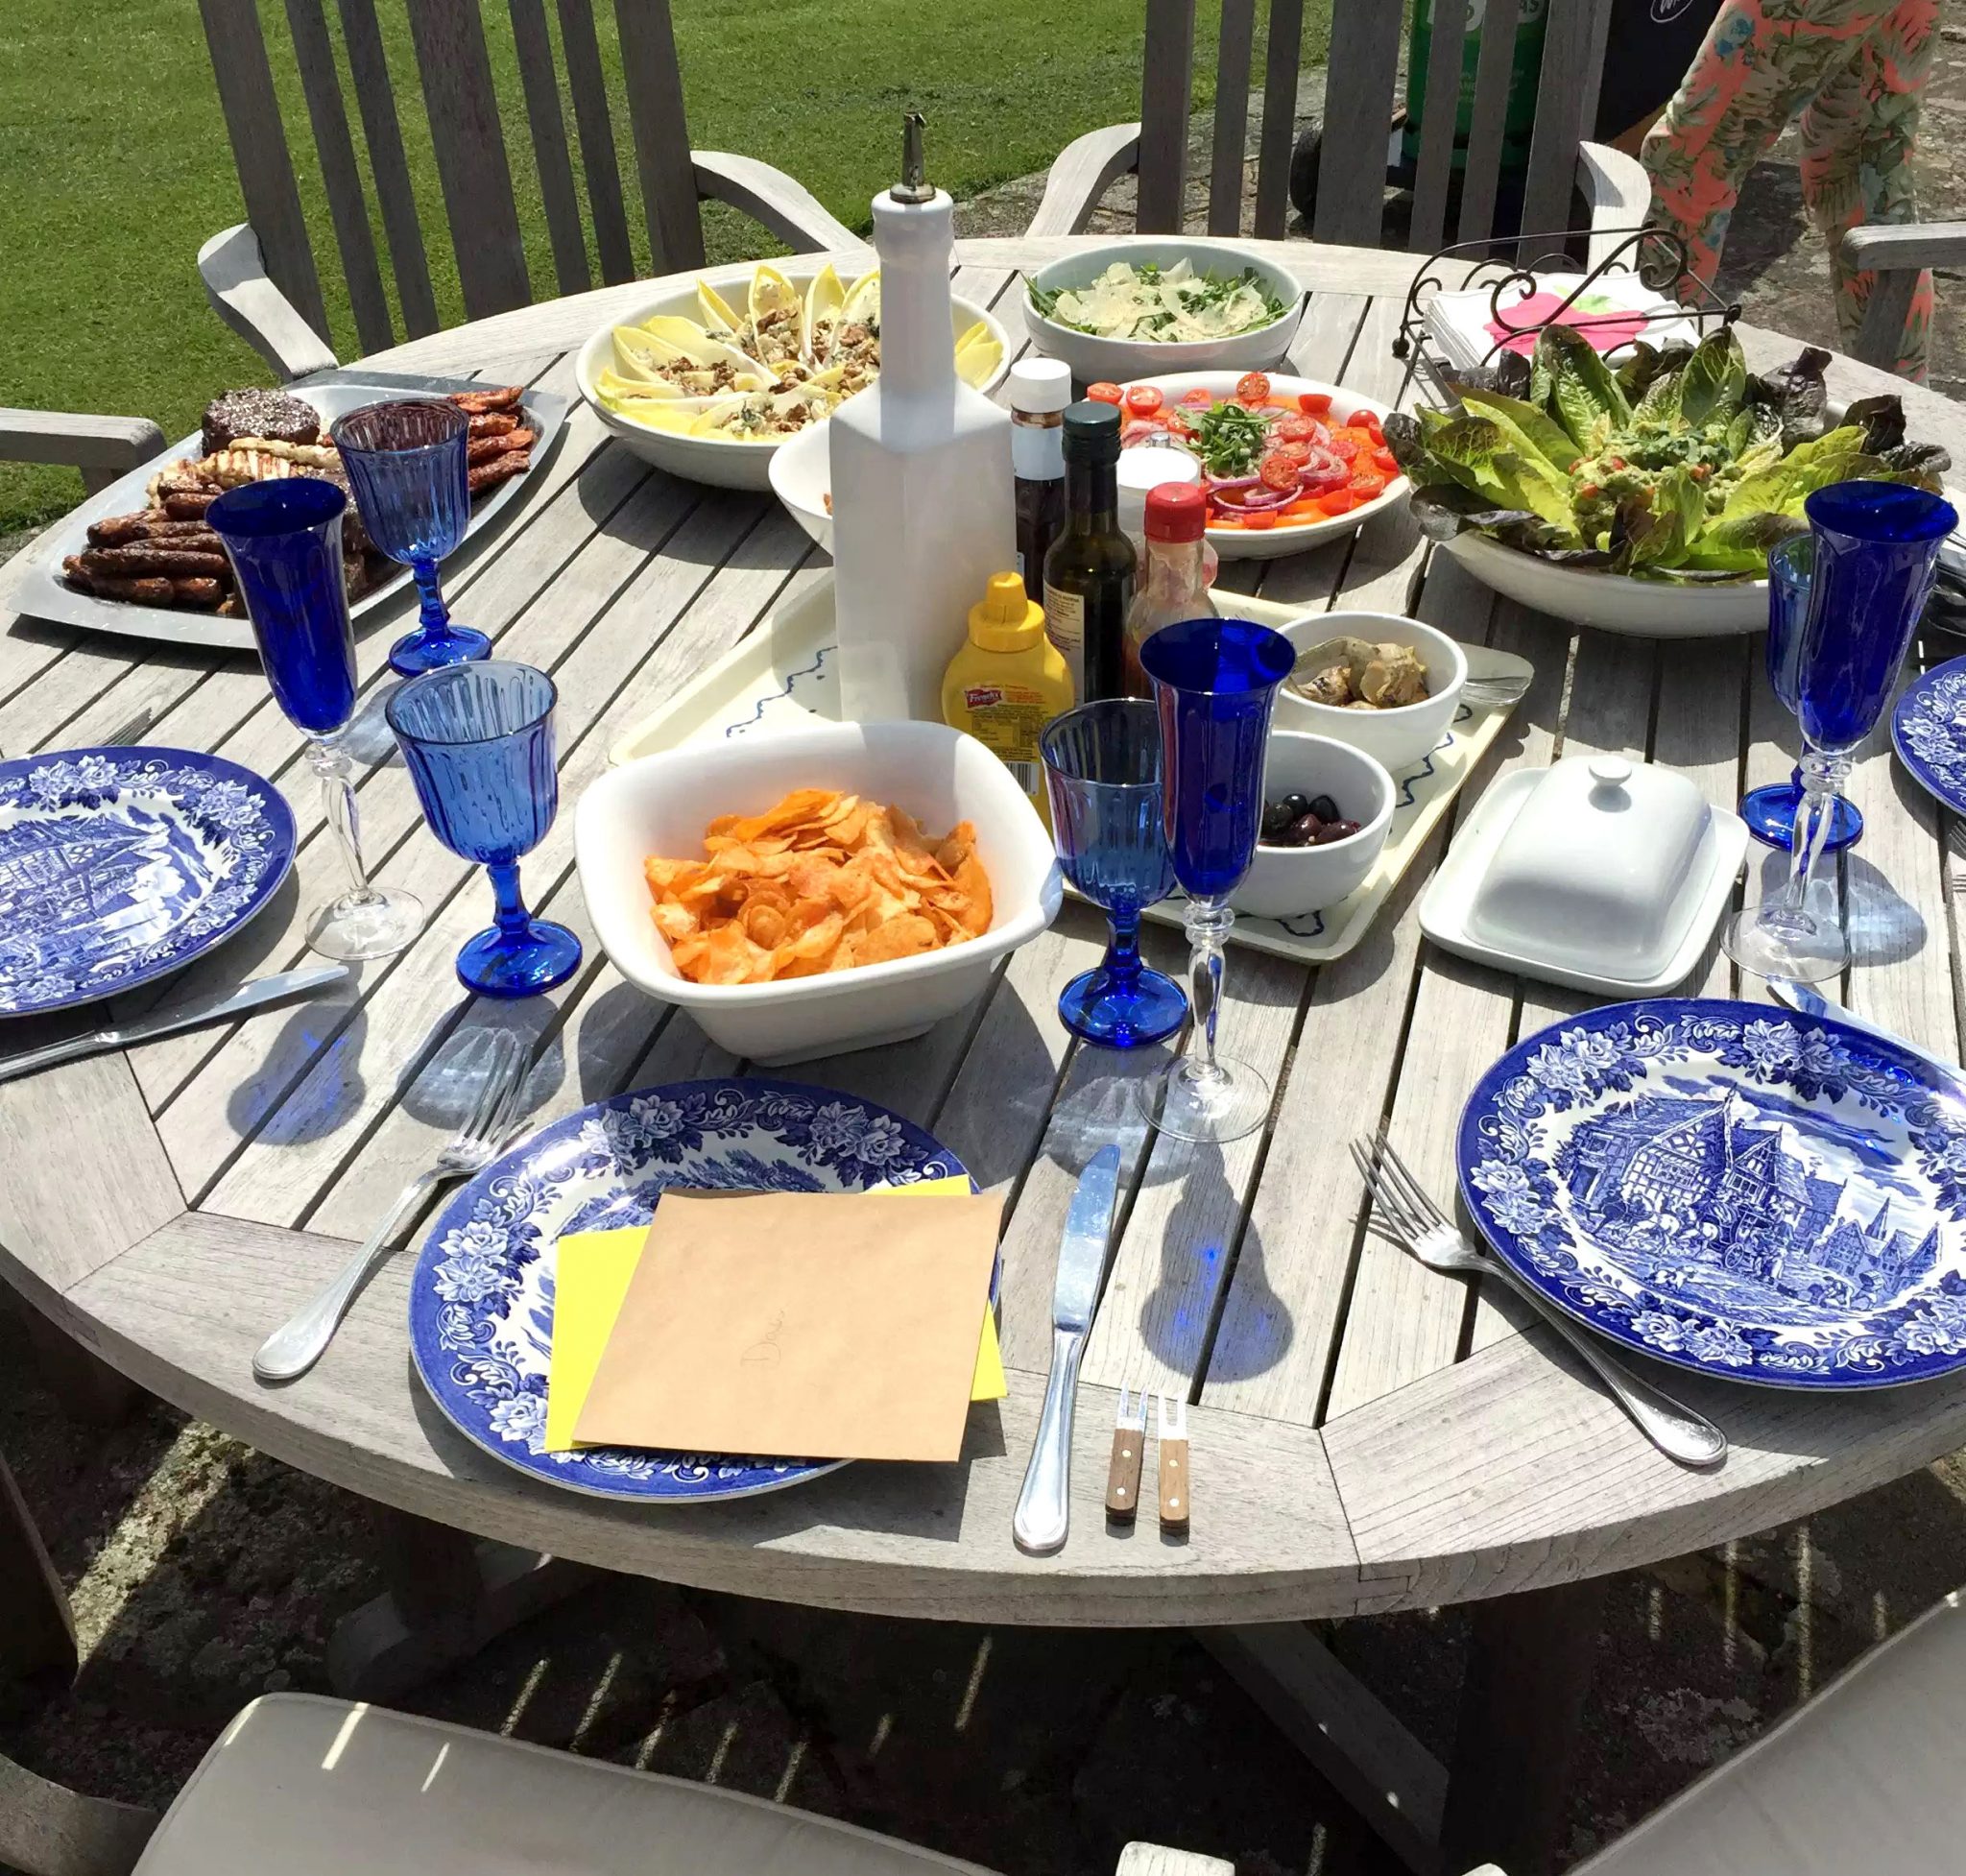 Fathers Day BBQ Marleys Family Sunshine Outdoor Dining Garden Celebration Meat Salads BBQ Lunch Healthy